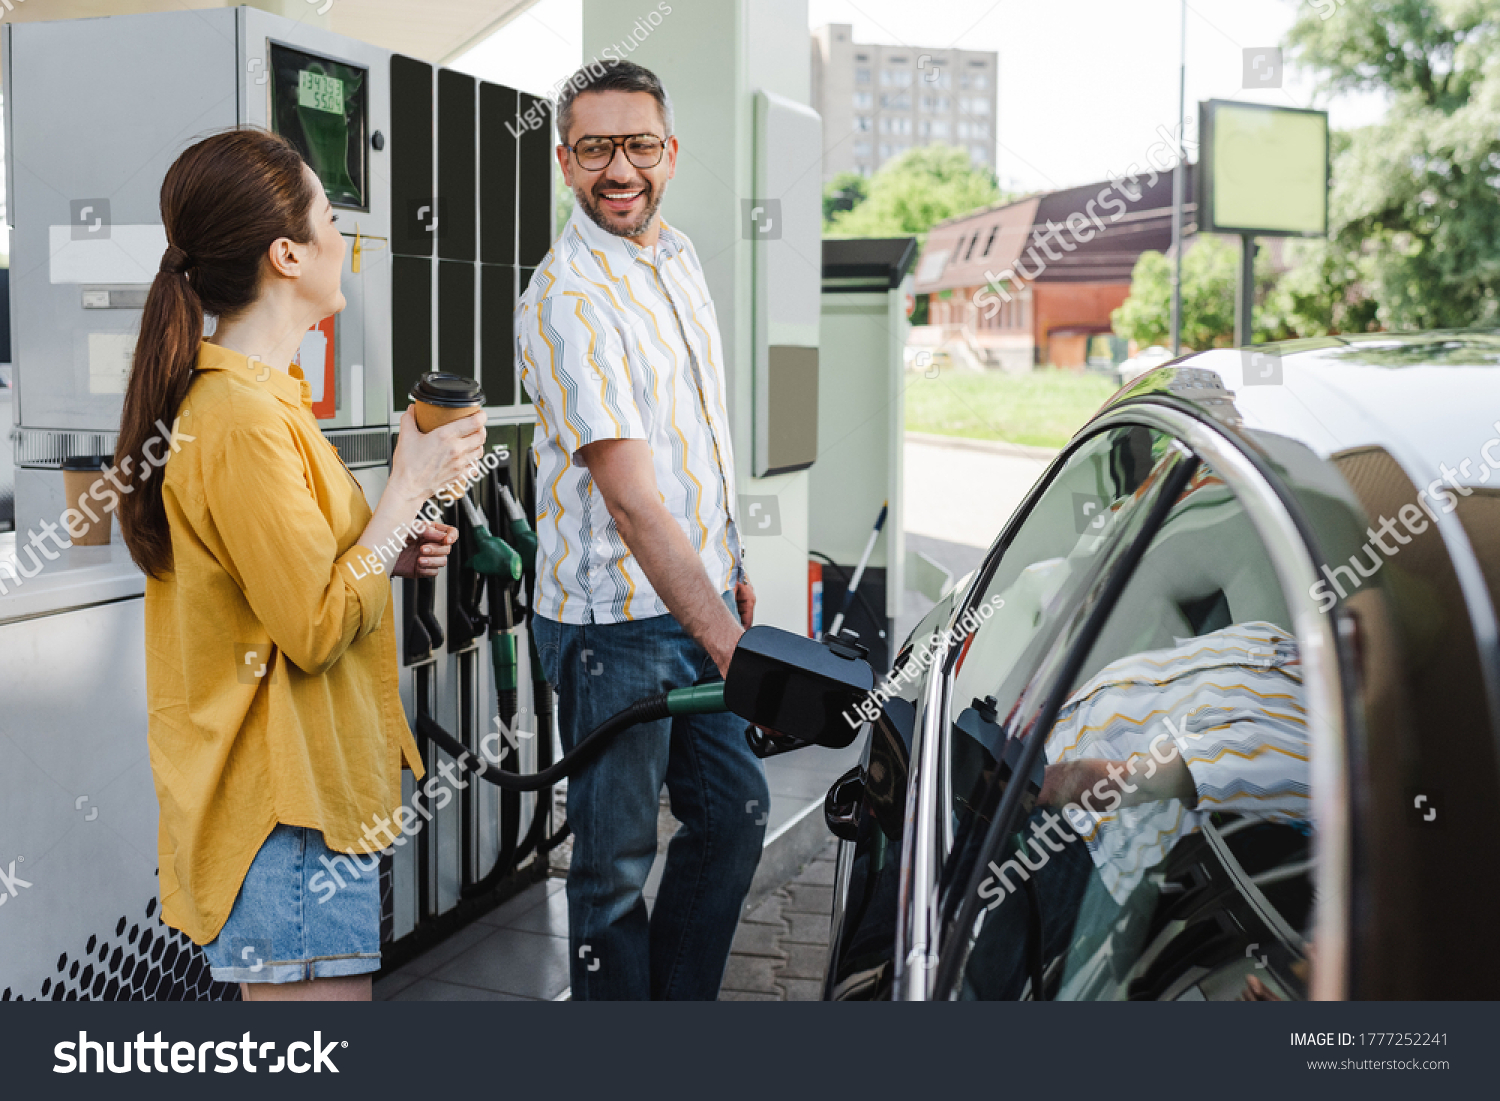 Selective focus of smiling man looking at wife with coffee to go while refueling car on gas station #1777252241